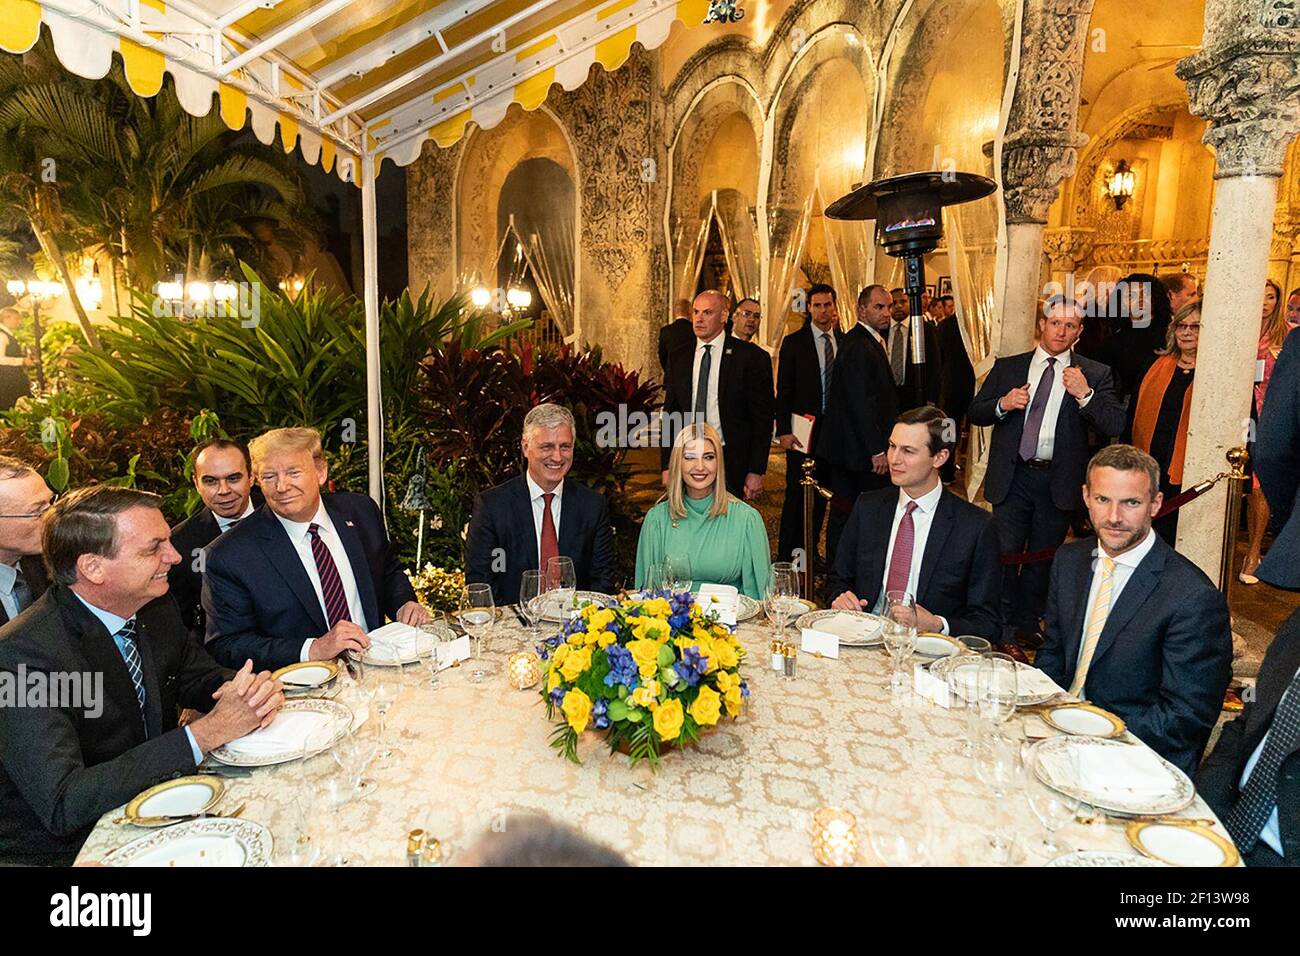 President Donald Trump hosts a working dinner for Brazil's President Jair Bolsonaro on Saturday evening March 7 2020 at Mar-a-Lago in Palm Beach Fla. Stock Photo